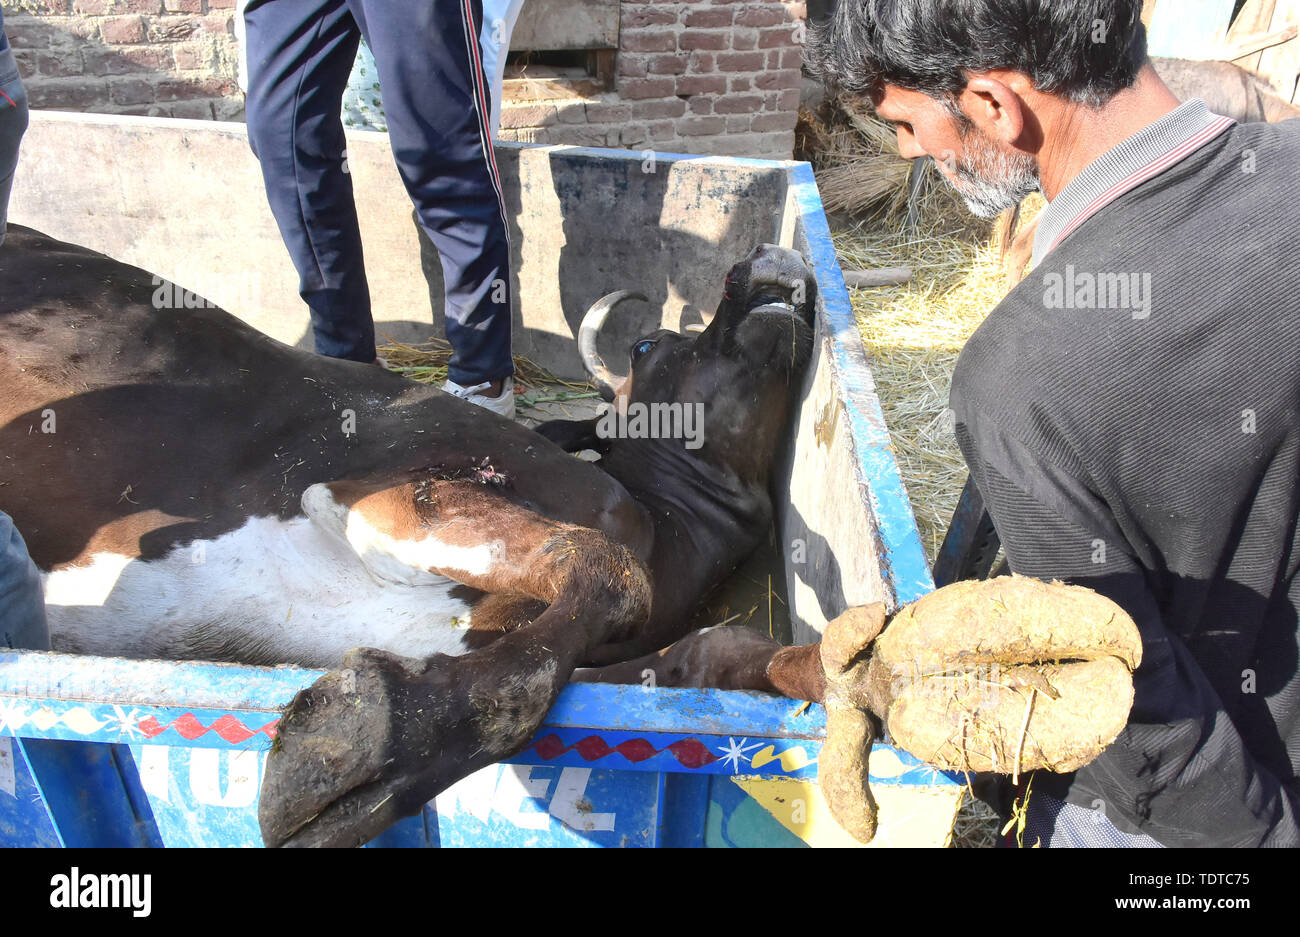 June 18, 2019 - Anantnag, Kashmir.18 June 2019. Locals remove the carcass of a cow believed to have been shot by Indian forces in the Mahrhama village of the Anantnag District in Indian Administered Kashmir. The dead cow was shot during counter-insurgency operations by the lndian forces looking for Sajad Ahmad Bhat, who was wanted by the authorities in connection with the deadly suicide attack responsible for the death of 40 paramilitary police officers on 14 February. Sajad Ahmad Bhat and his associate Tawseef Ahmed Bhat were killed during a Monday overnight encounter with Indian Forces. In a Stock Photo